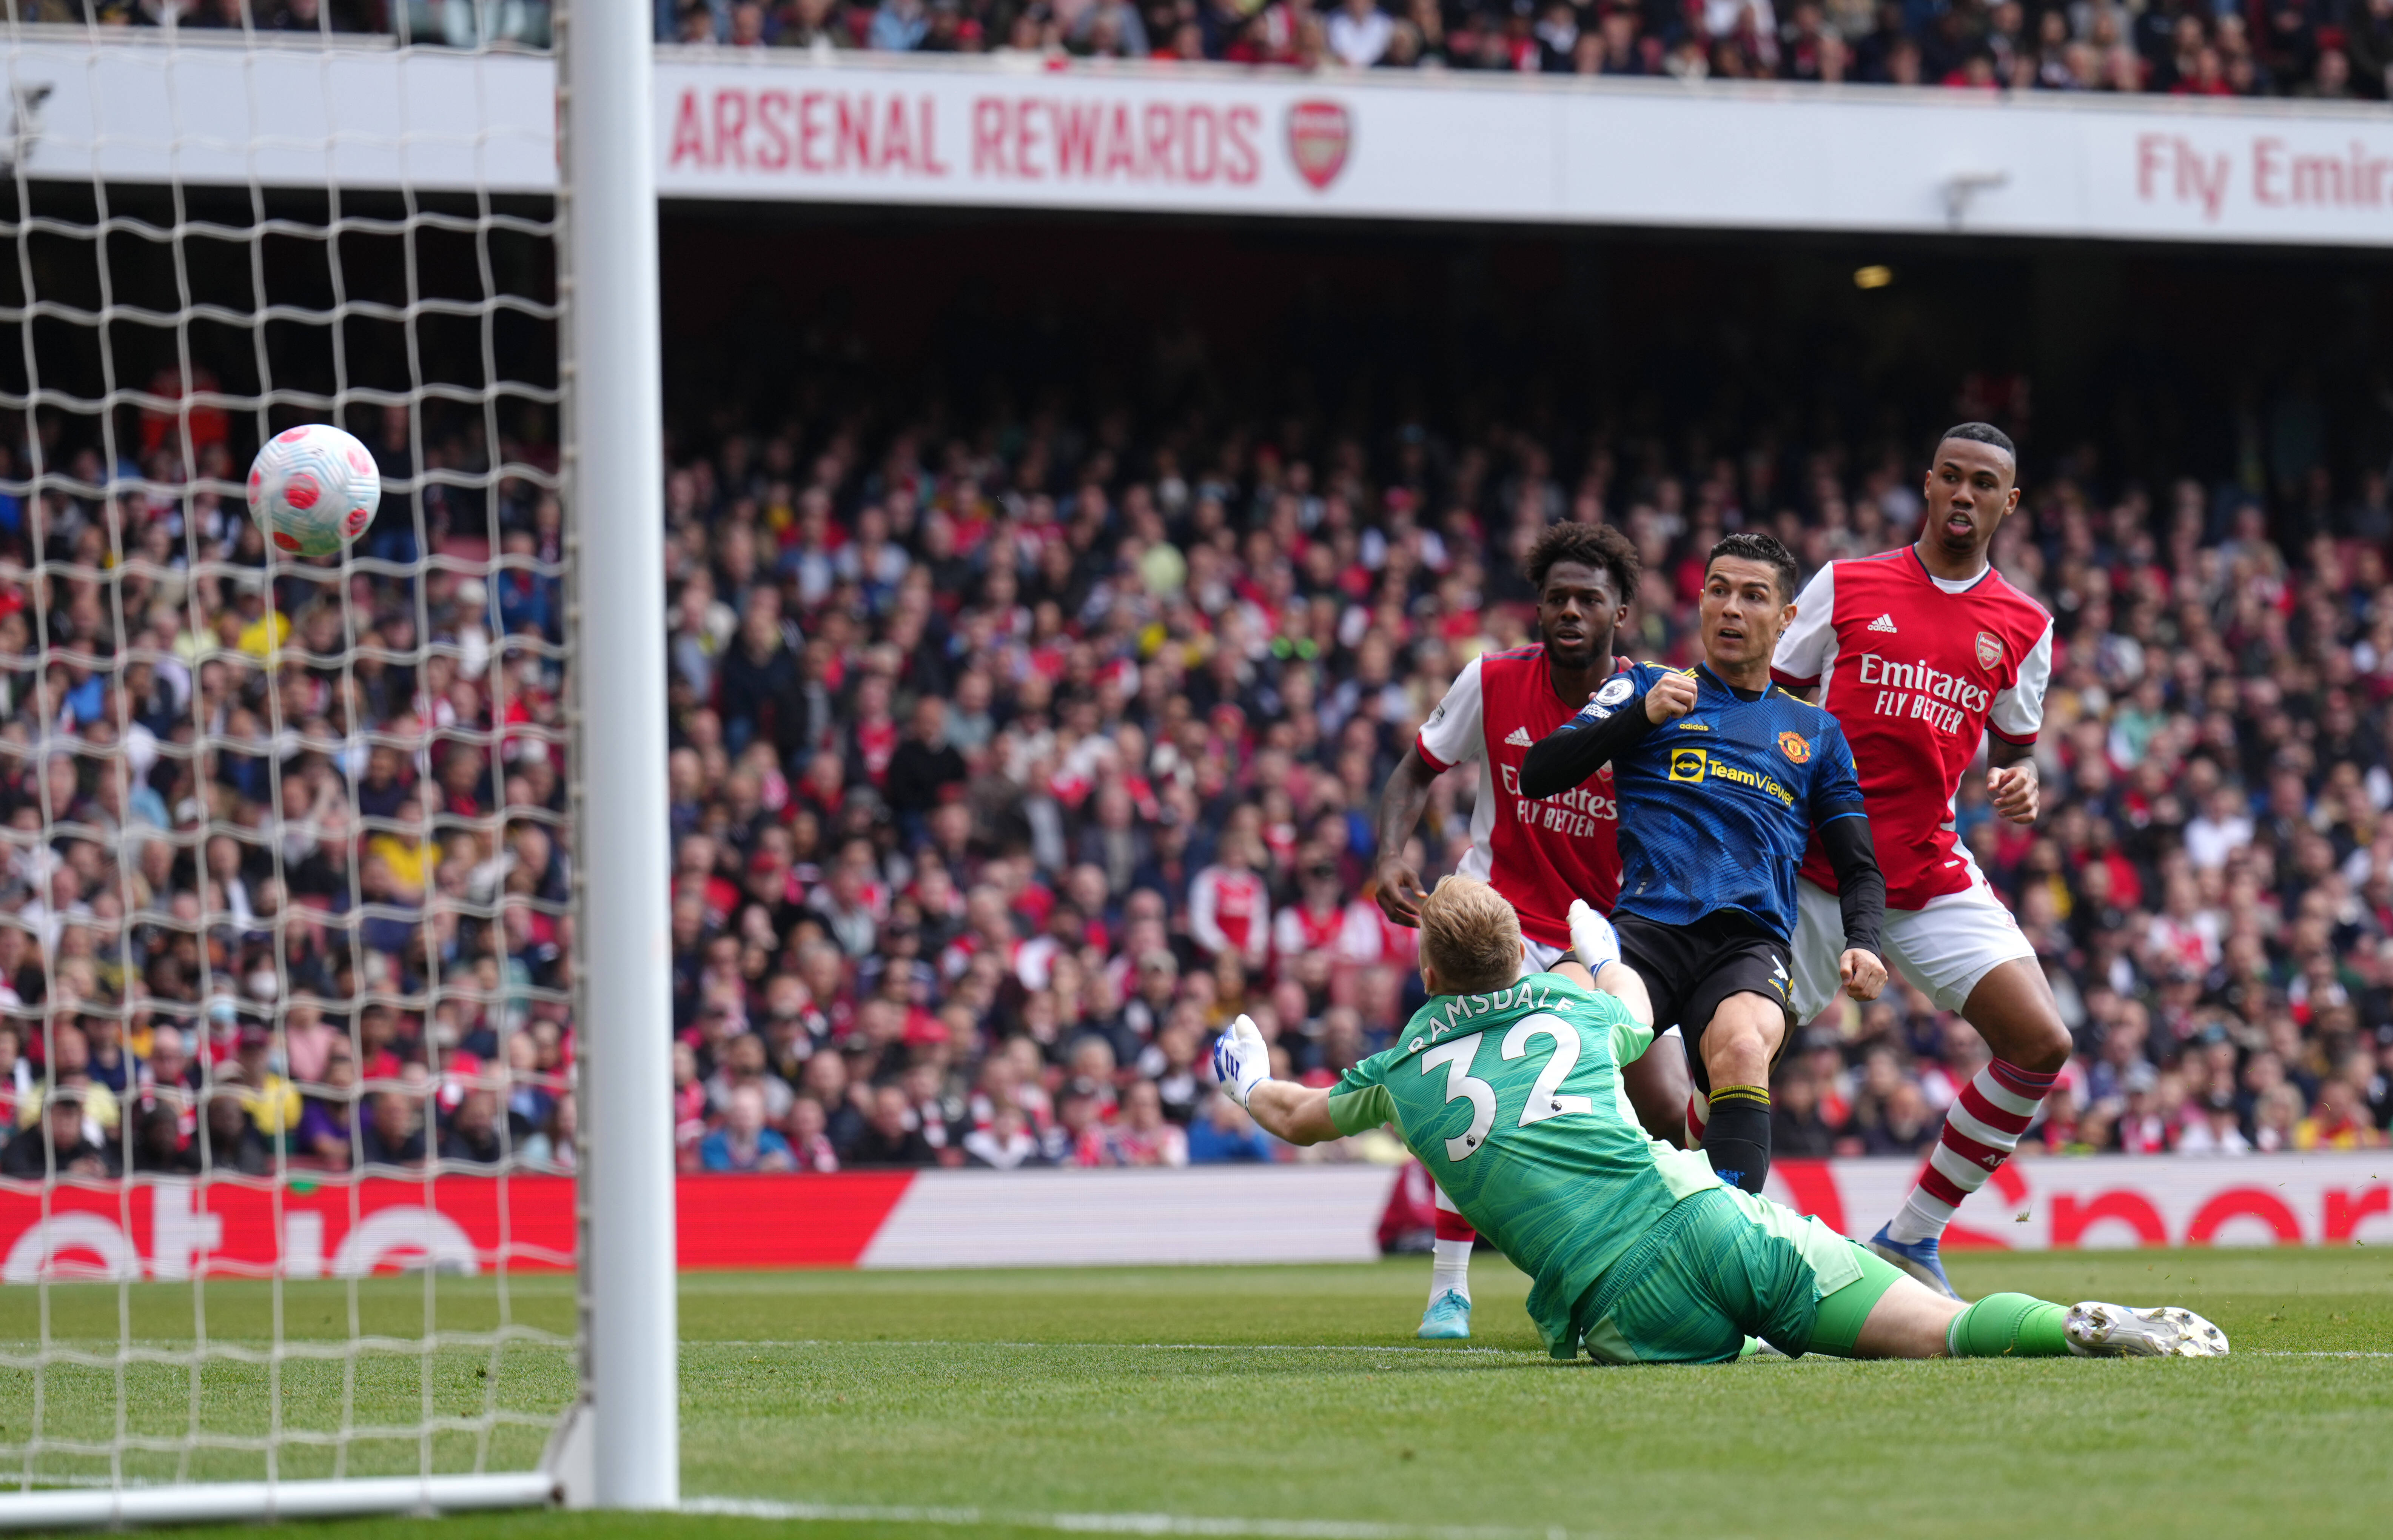 Cristiano Ronaldo pictured scoring his 100th Premier League goal for Manchester United at Arsenal's Emirates Stadium in April 2022